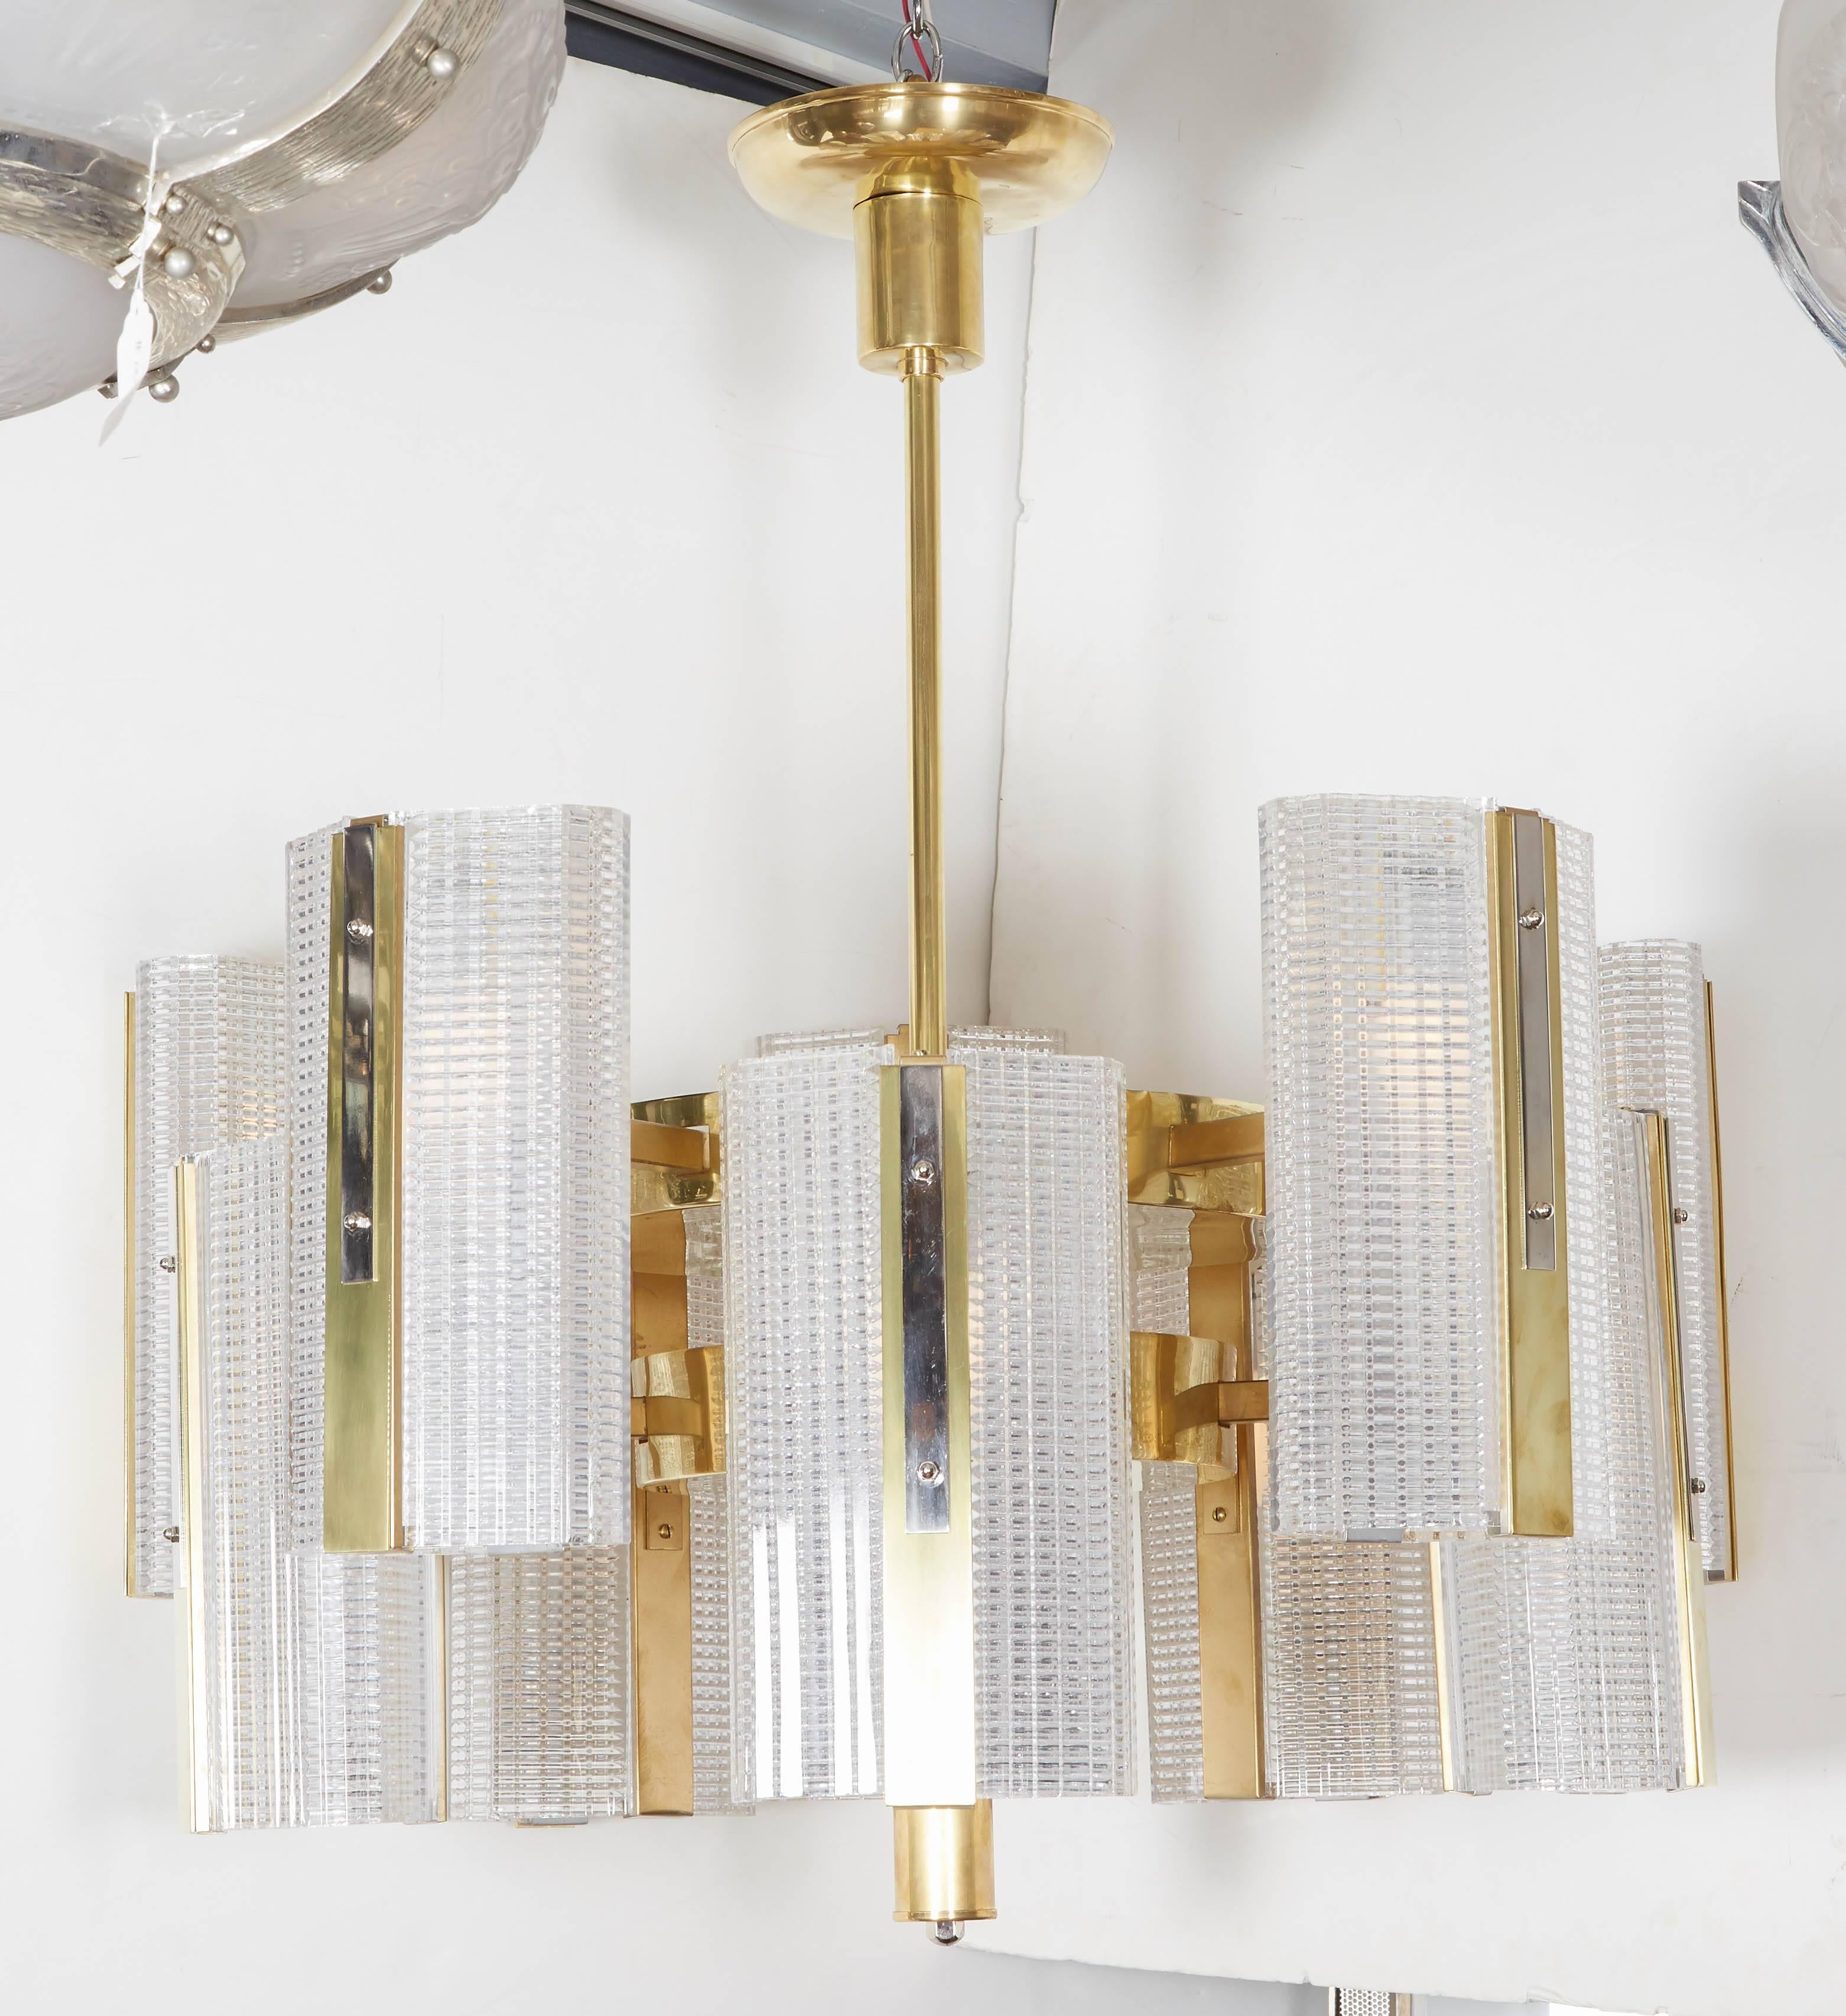 Pair or single available
Very large modernist highly architectural ten arm chandelier comprising bi level rectangular boxes of interlacing lines in a grid pattern mounted in a polished brass armature.
The crystal glass boxes glisten and shimmer in